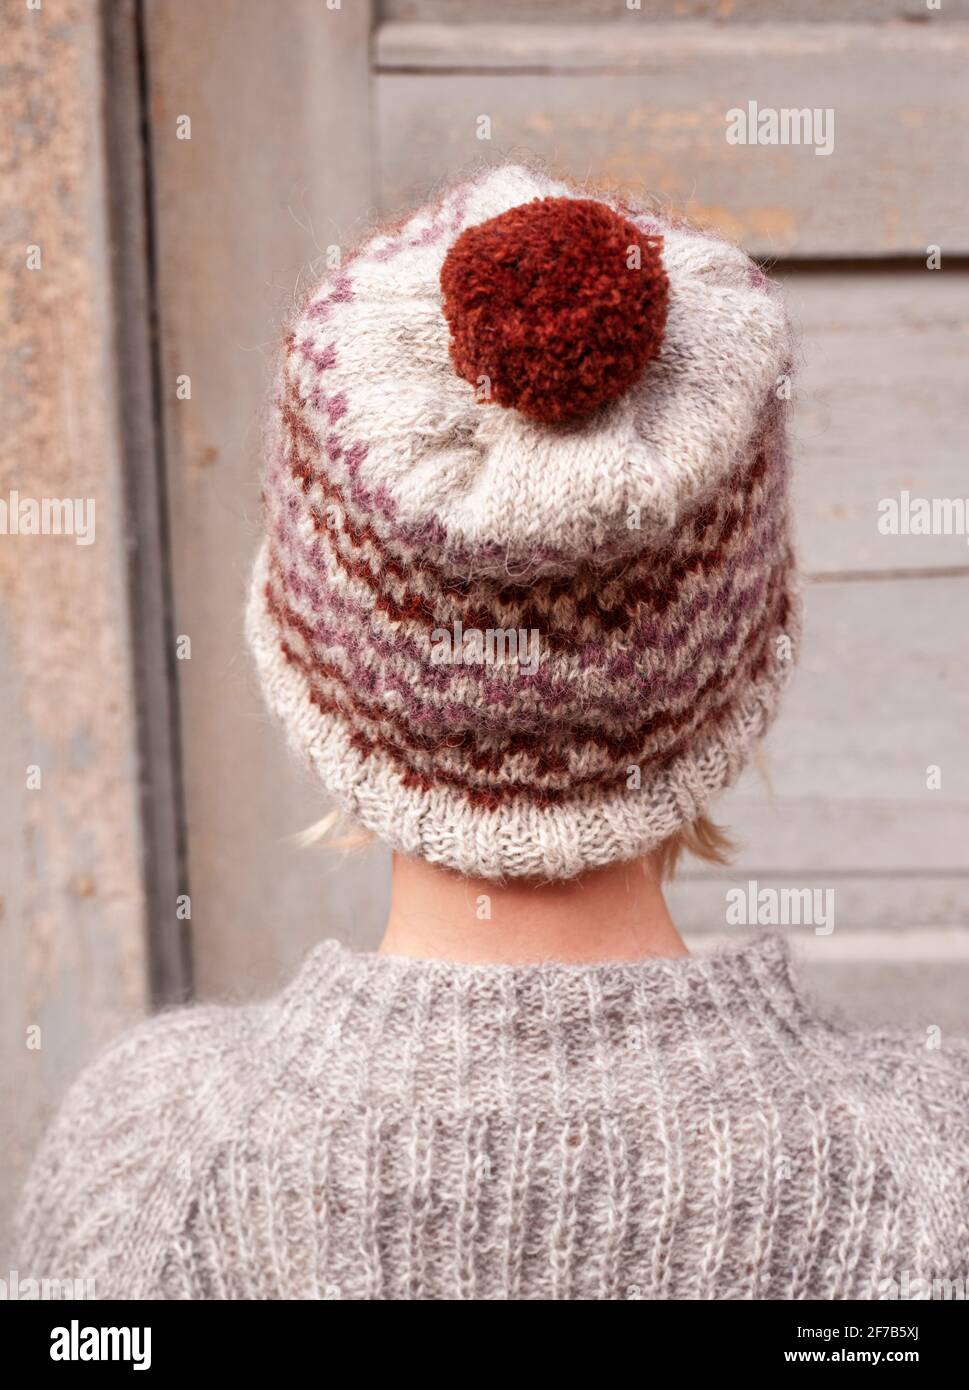 Rear view of child wearing knit hat with pompom Stock Photo